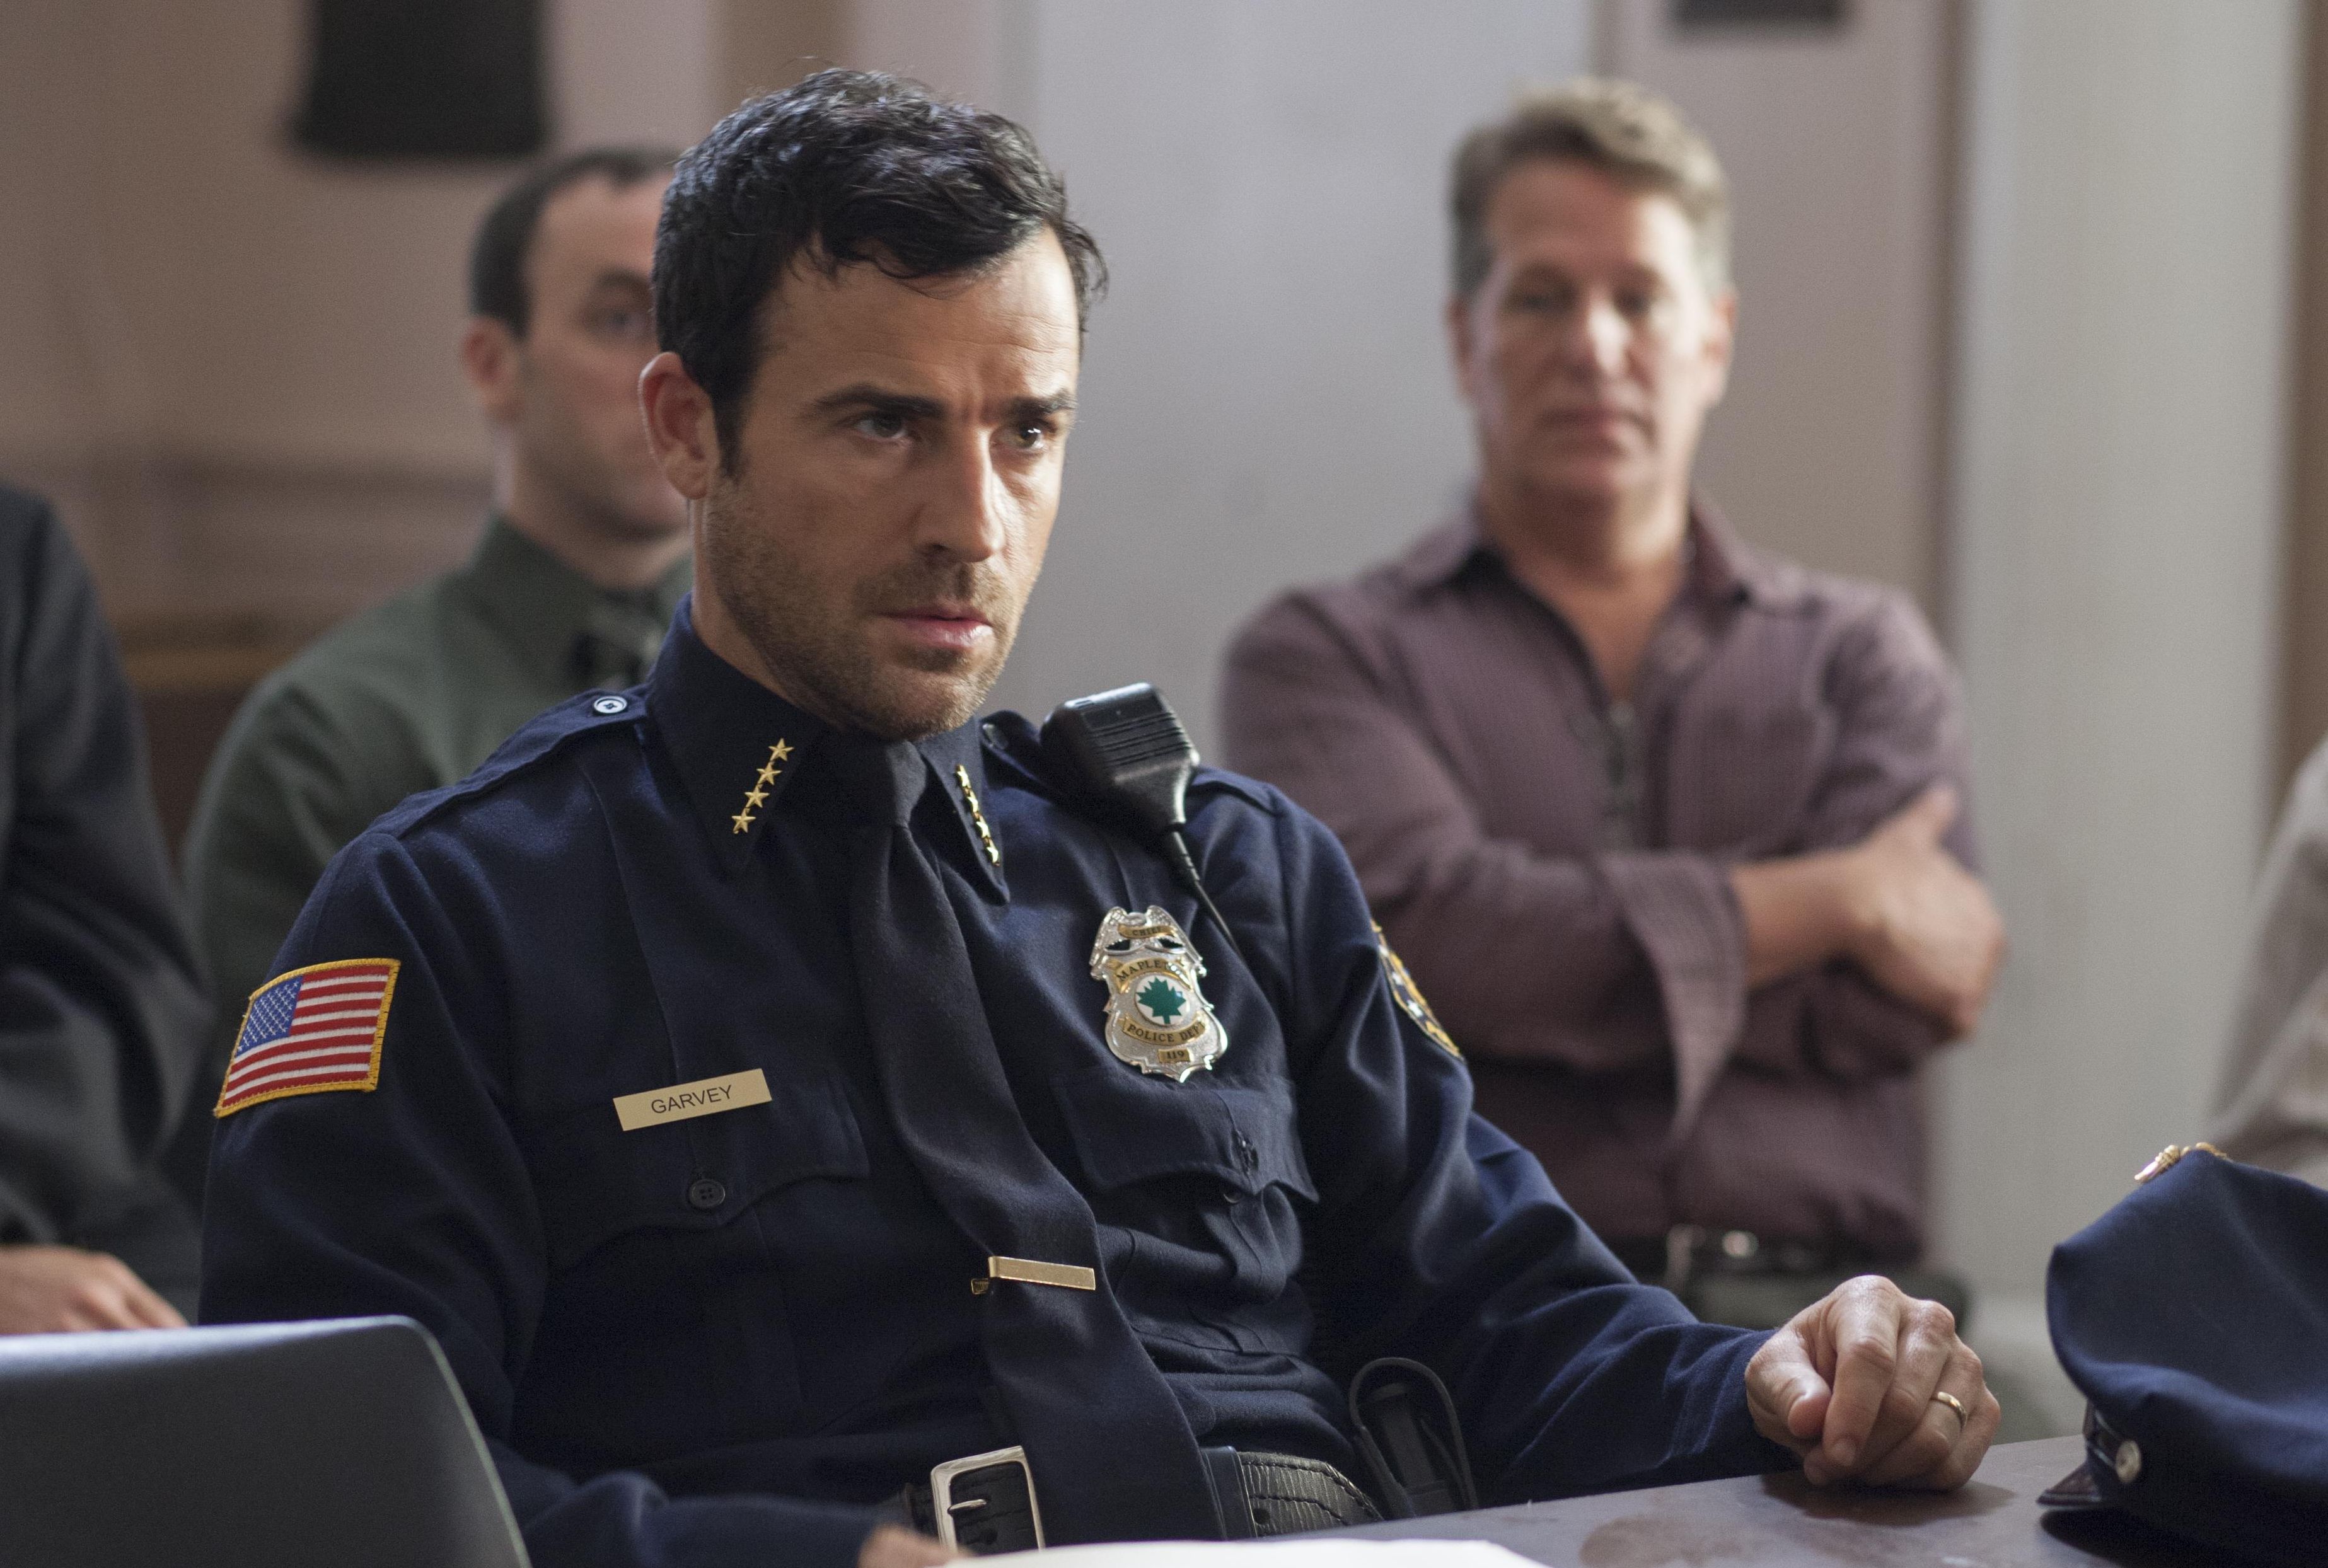 Justin Theroux as chief Garvey in The Leftovers